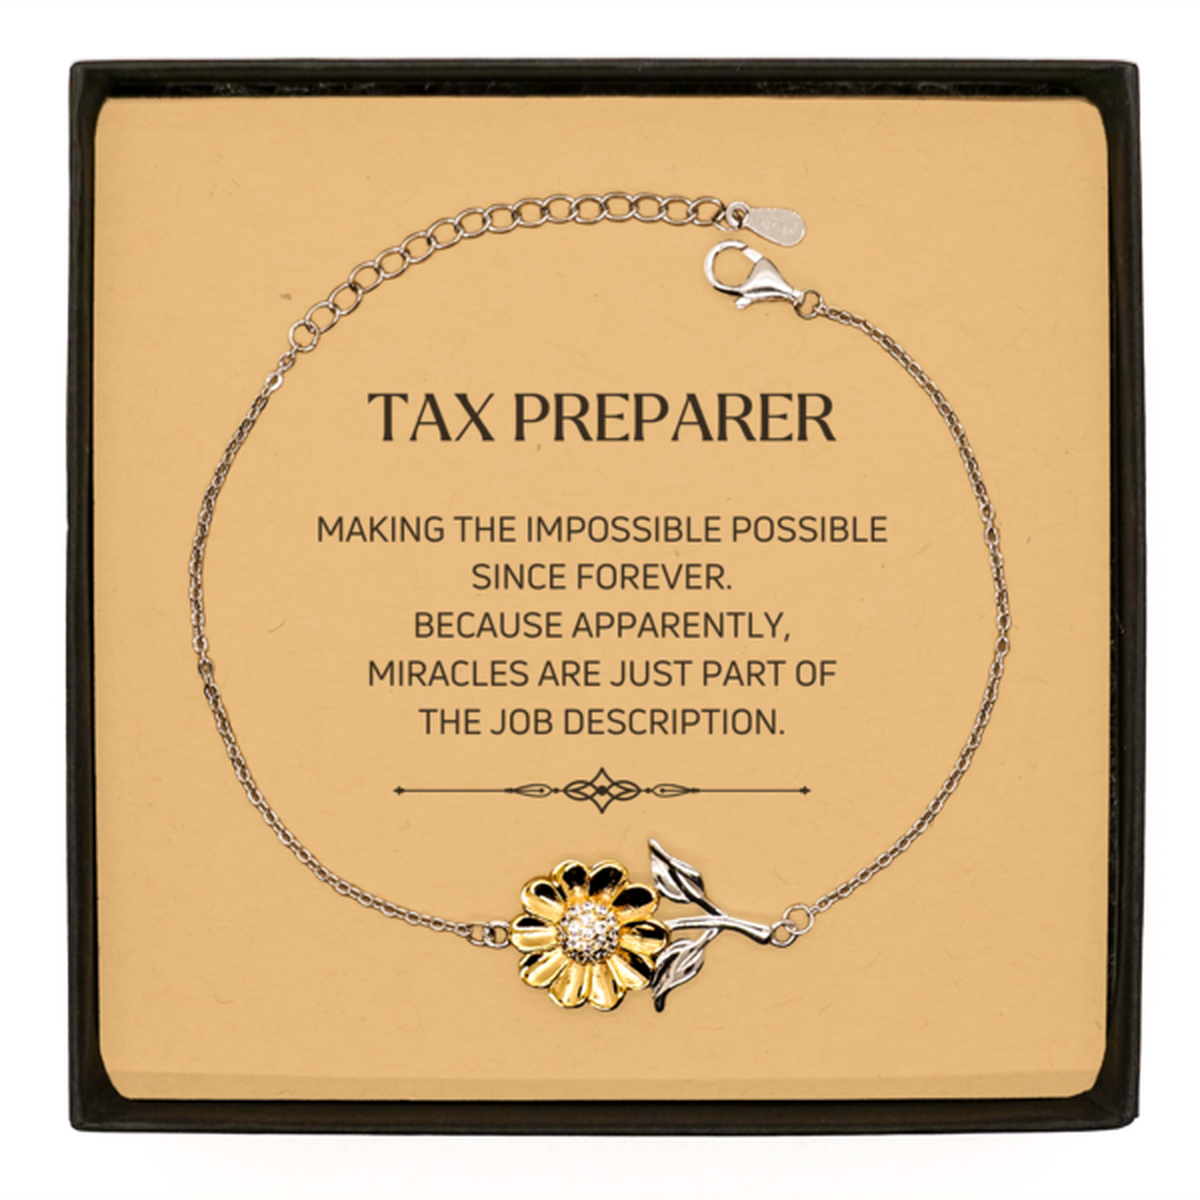 Funny Tax Preparer Gifts, Miracles are just part of the job description, Inspirational Birthday Sunflower Bracelet For Tax Preparer, Men, Women, Coworkers, Friends, Boss